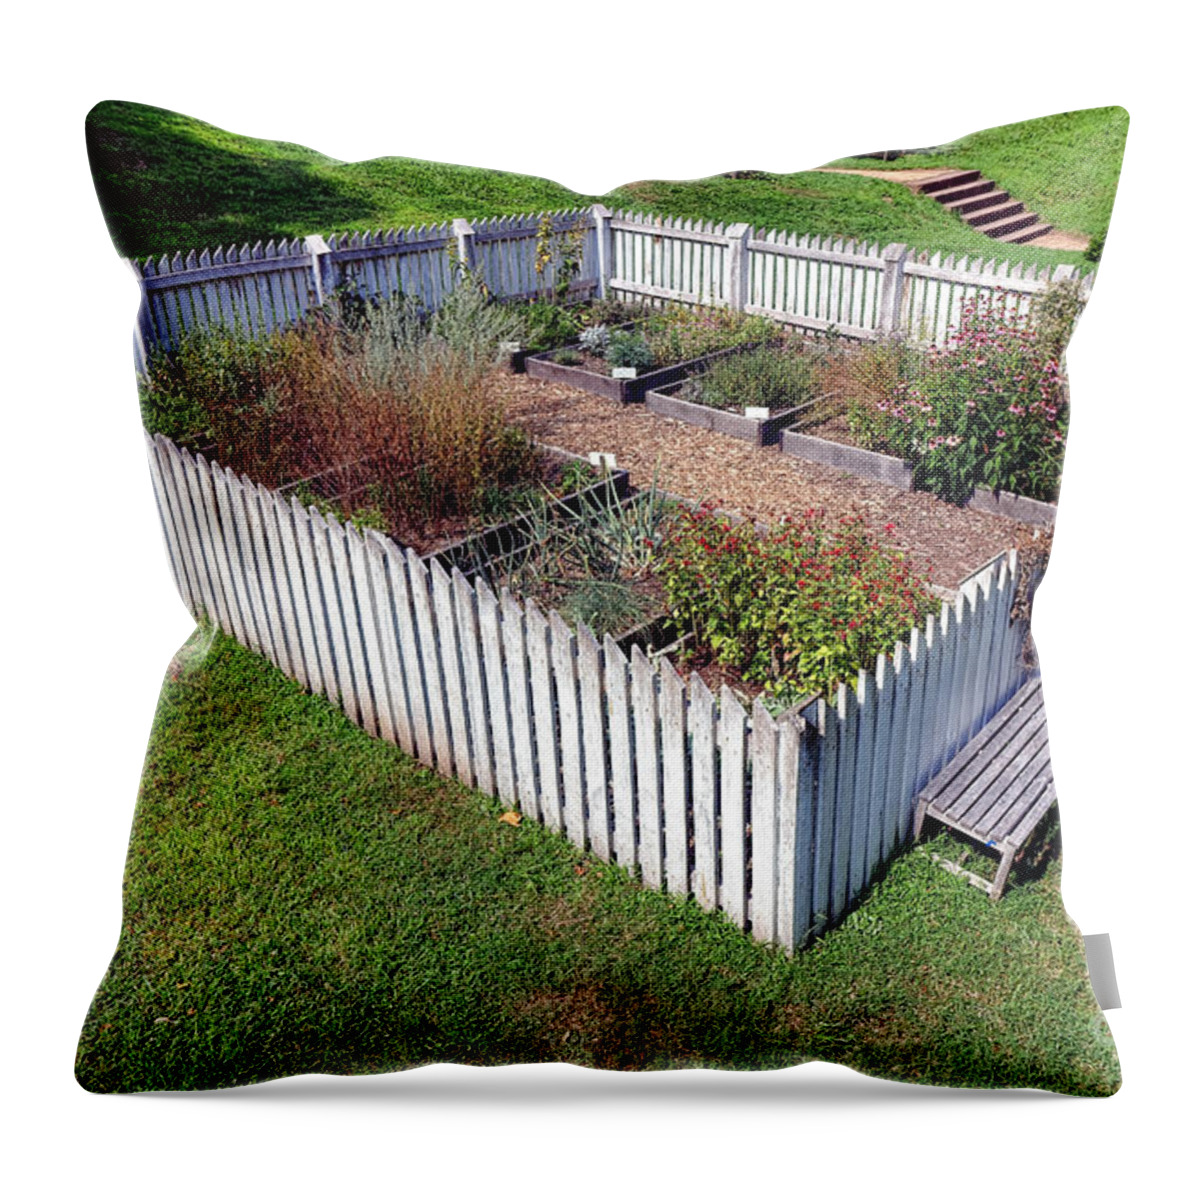 Colonial Throw Pillow featuring the photograph A Colonial Garden by Olivier Le Queinec